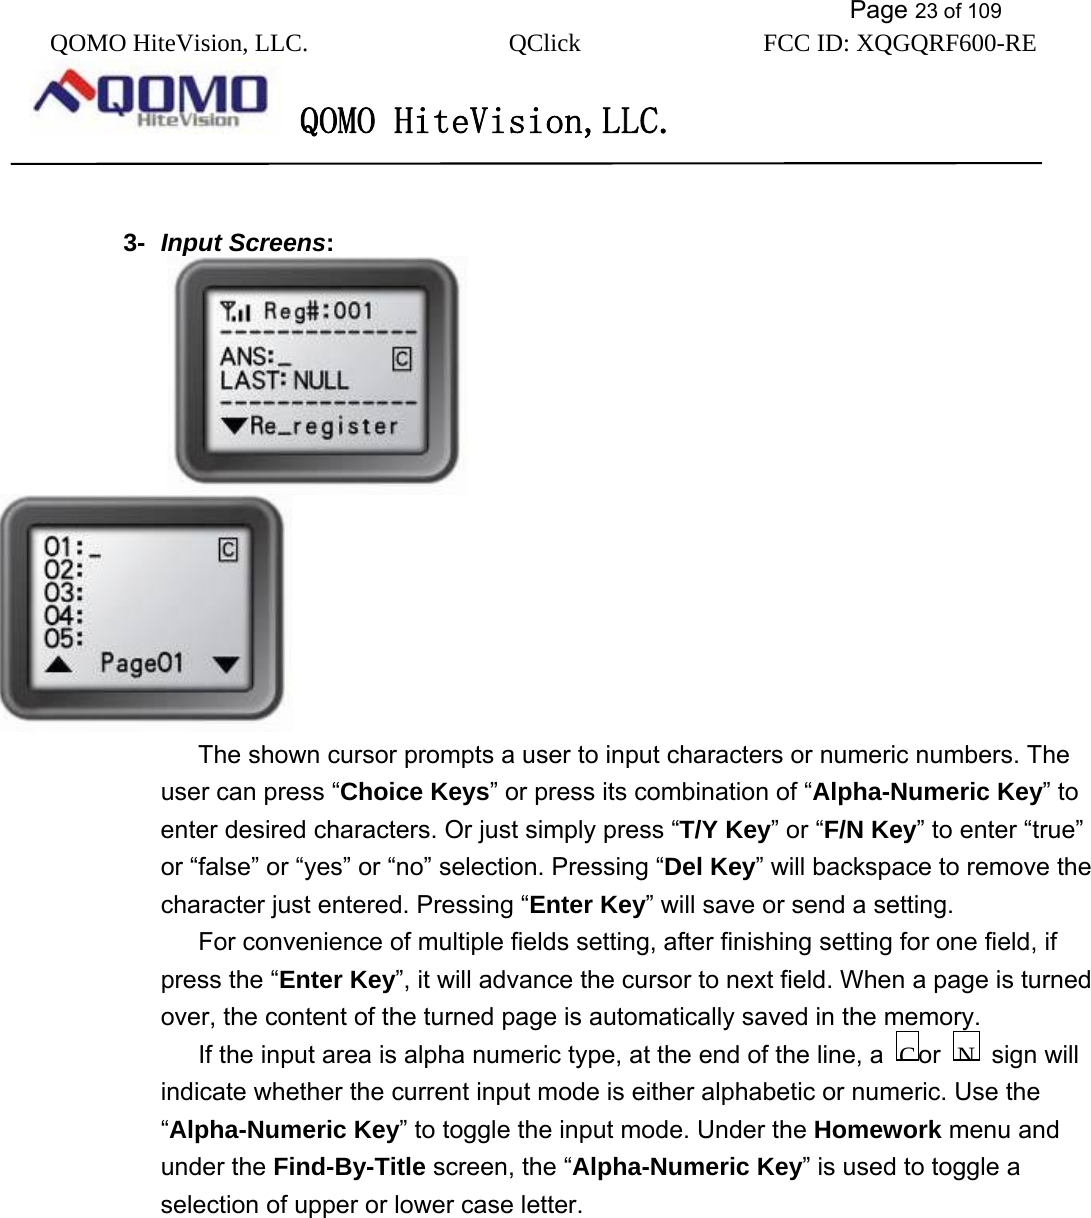           Page 23 of 109 QOMO HiteVision, LLC.  QClick        FCC ID: XQGQRF600-RE     QOMO HiteVision,LLC.    3-  Input Screens:                                     The shown cursor prompts a user to input characters or numeric numbers. The user can press “Choice Keys” or press its combination of “Alpha-Numeric Key” to enter desired characters. Or just simply press “T/Y Key” or “F/N Key” to enter “true” or “false” or “yes” or “no” selection. Pressing “Del Key” will backspace to remove the character just entered. Pressing “Enter Key” will save or send a setting.   For convenience of multiple fields setting, after finishing setting for one field, if press the “Enter Key”, it will advance the cursor to next field. When a page is turned over, the content of the turned page is automatically saved in the memory. If the input area is alpha numeric type, at the end of the line, a  or    sign will indicate whether the current input mode is either alphabetic or numeric. Use the “Alpha-Numeric Key” to toggle the input mode. Under the Homework menu and under the Find-By-Title screen, the “Alpha-Numeric Key” is used to toggle a selection of upper or lower case letter. NC